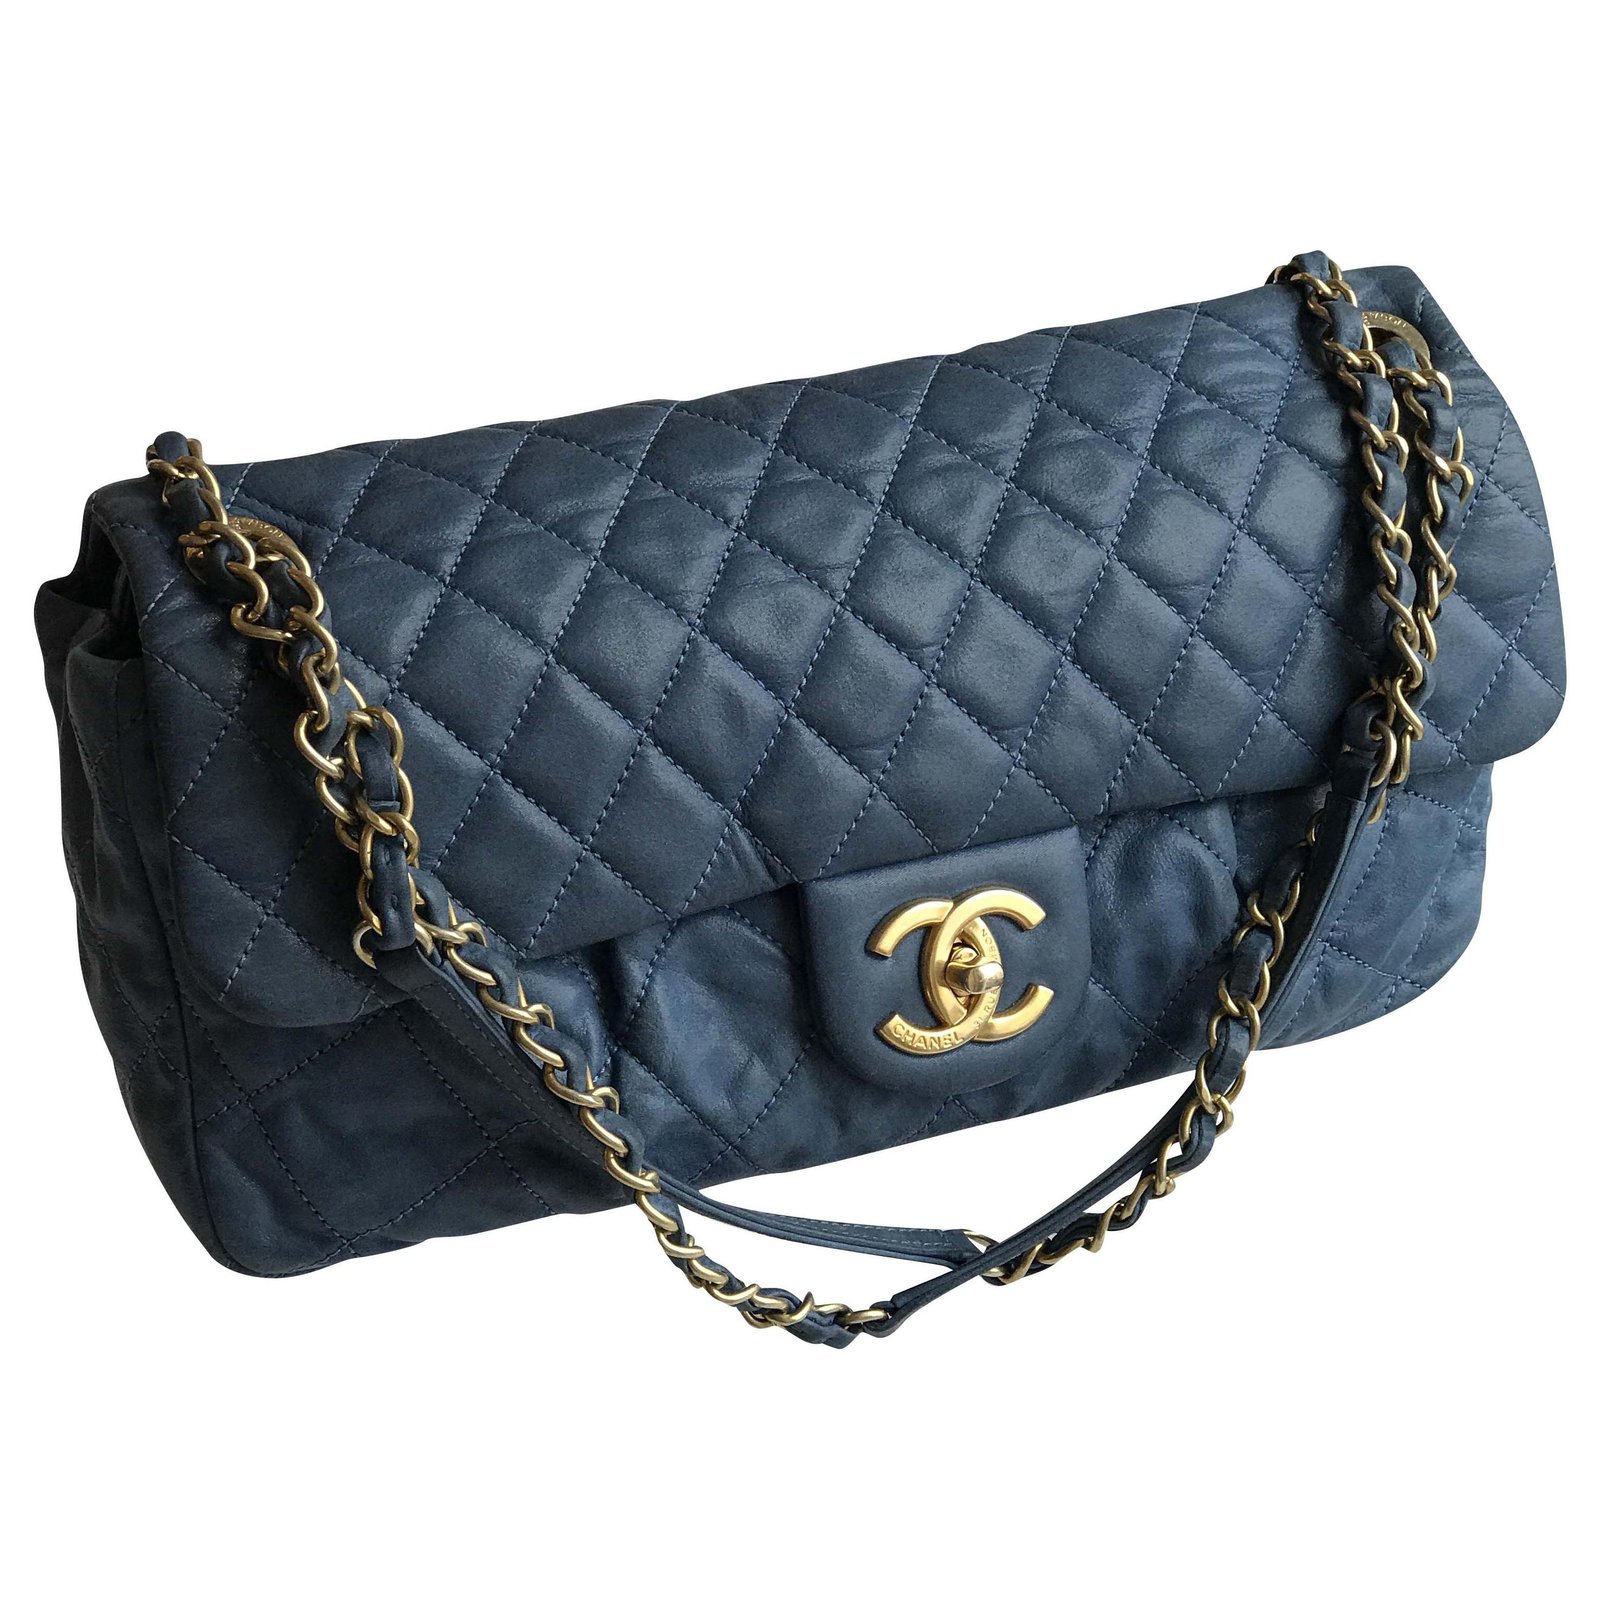 Chanel Navy Blue Quilted Leather 31 Rue Cambon Flap Bag Chanel